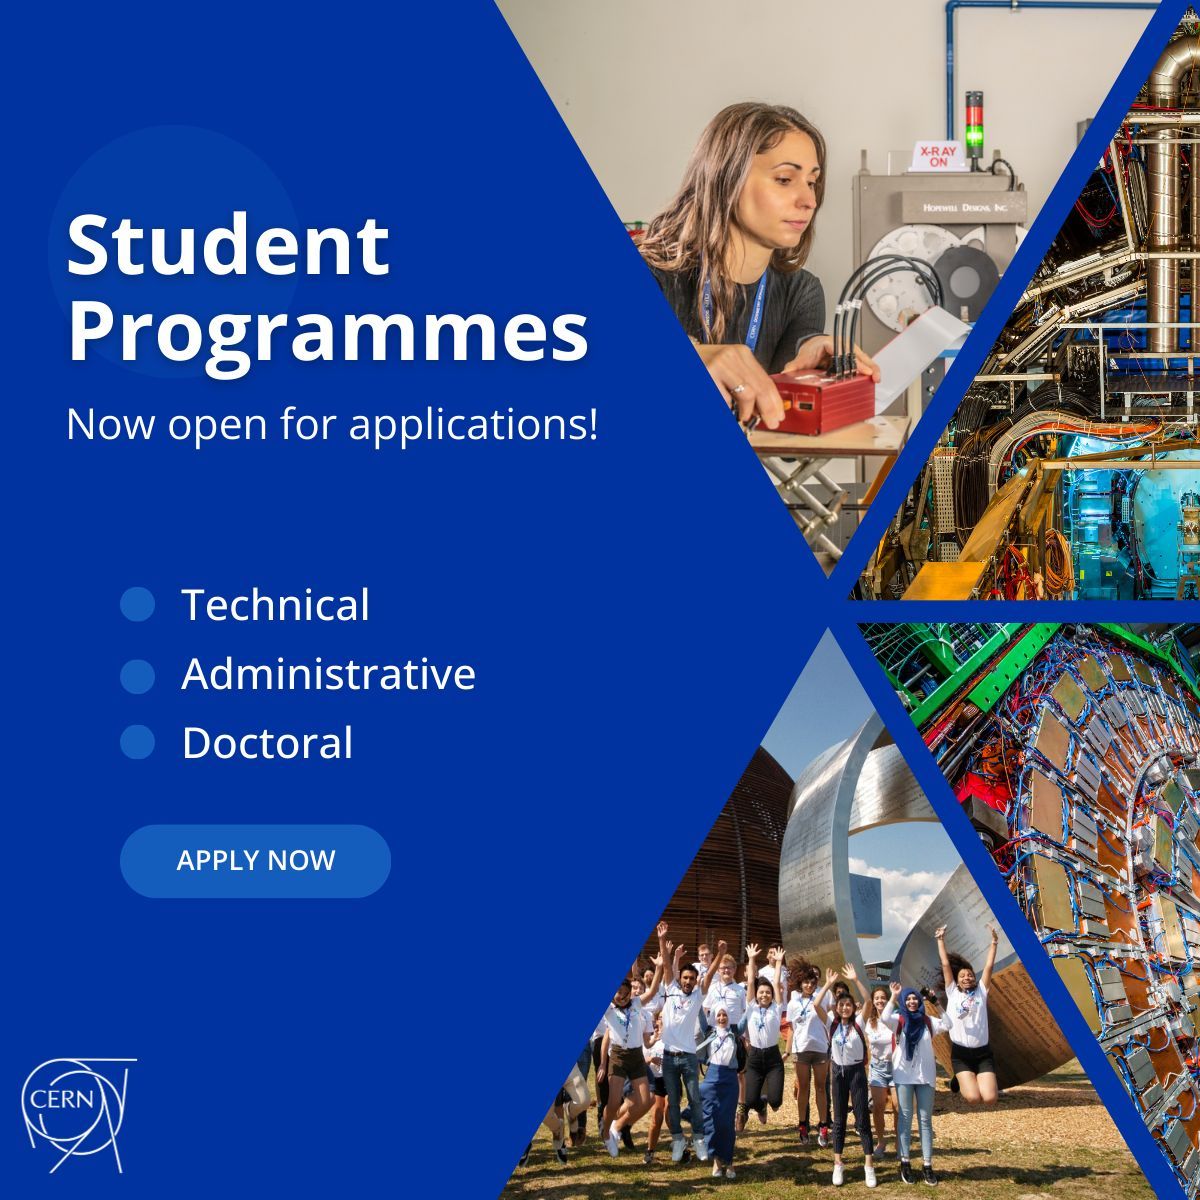 STEM and business students, listen closely: are you pursuing a bachelor’s or master’s degree? Or could you be thinking about starting your PhD studies? CERN could be the place for you! Learn more and apply today: cern.ch/hlkob Deadline: 11.03.2024 #CERN. Take part!